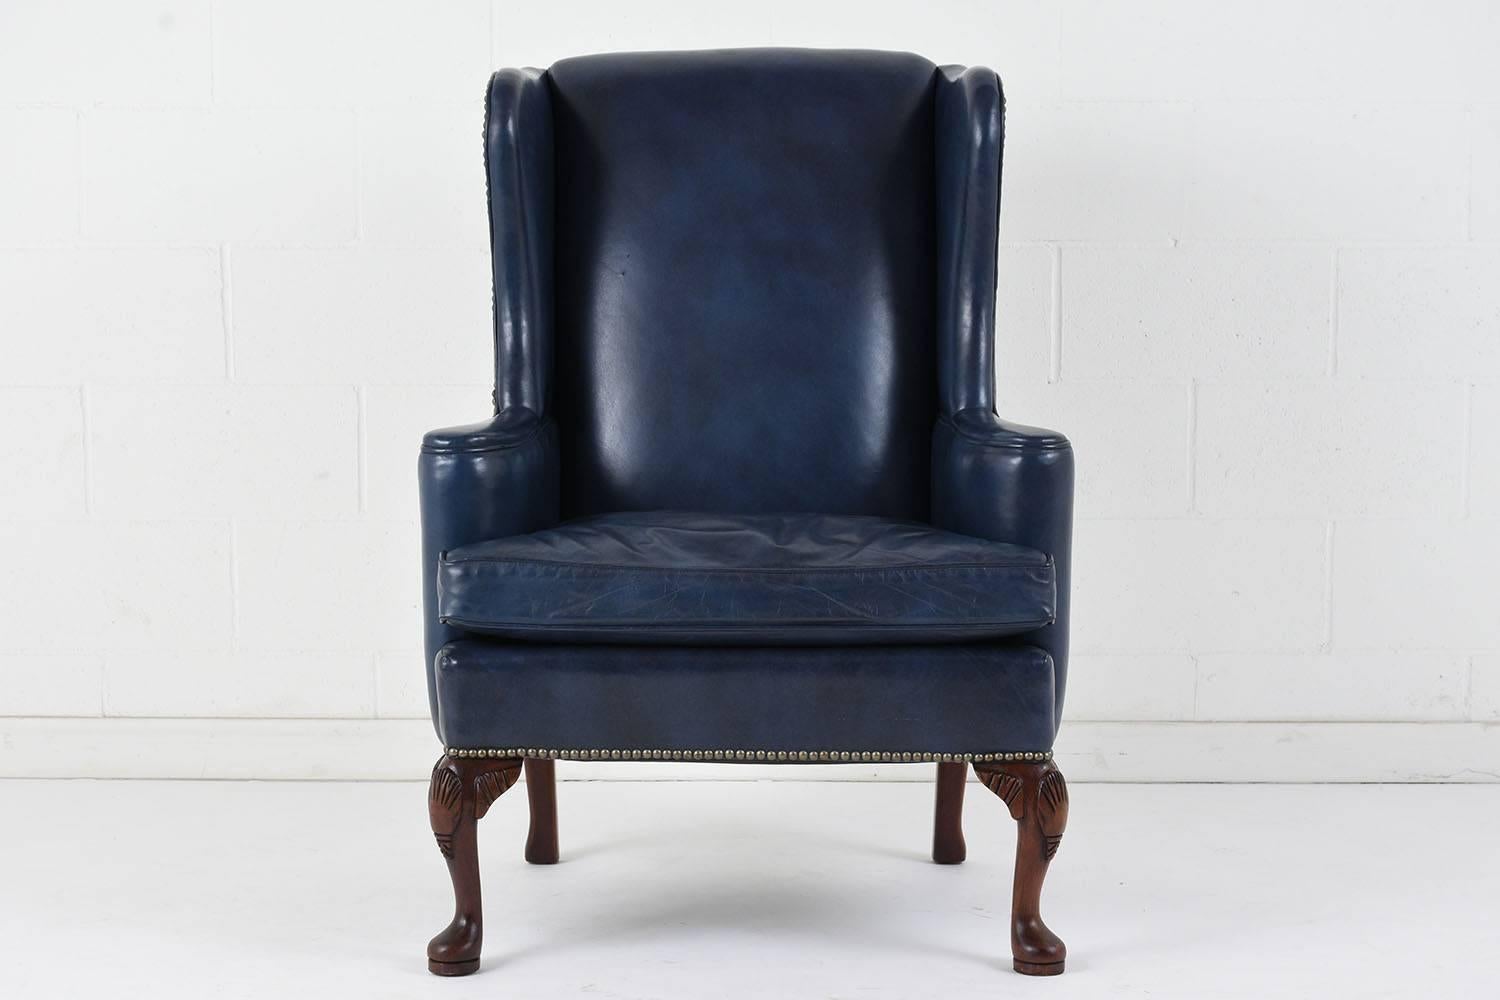 This 1970s Regency-style wing back chair features the original blue leather upholstery covering the majority of the chair. The seat has classic wing shaped sides and arm rests with scroll details extending outward. The comfortable seat cushion